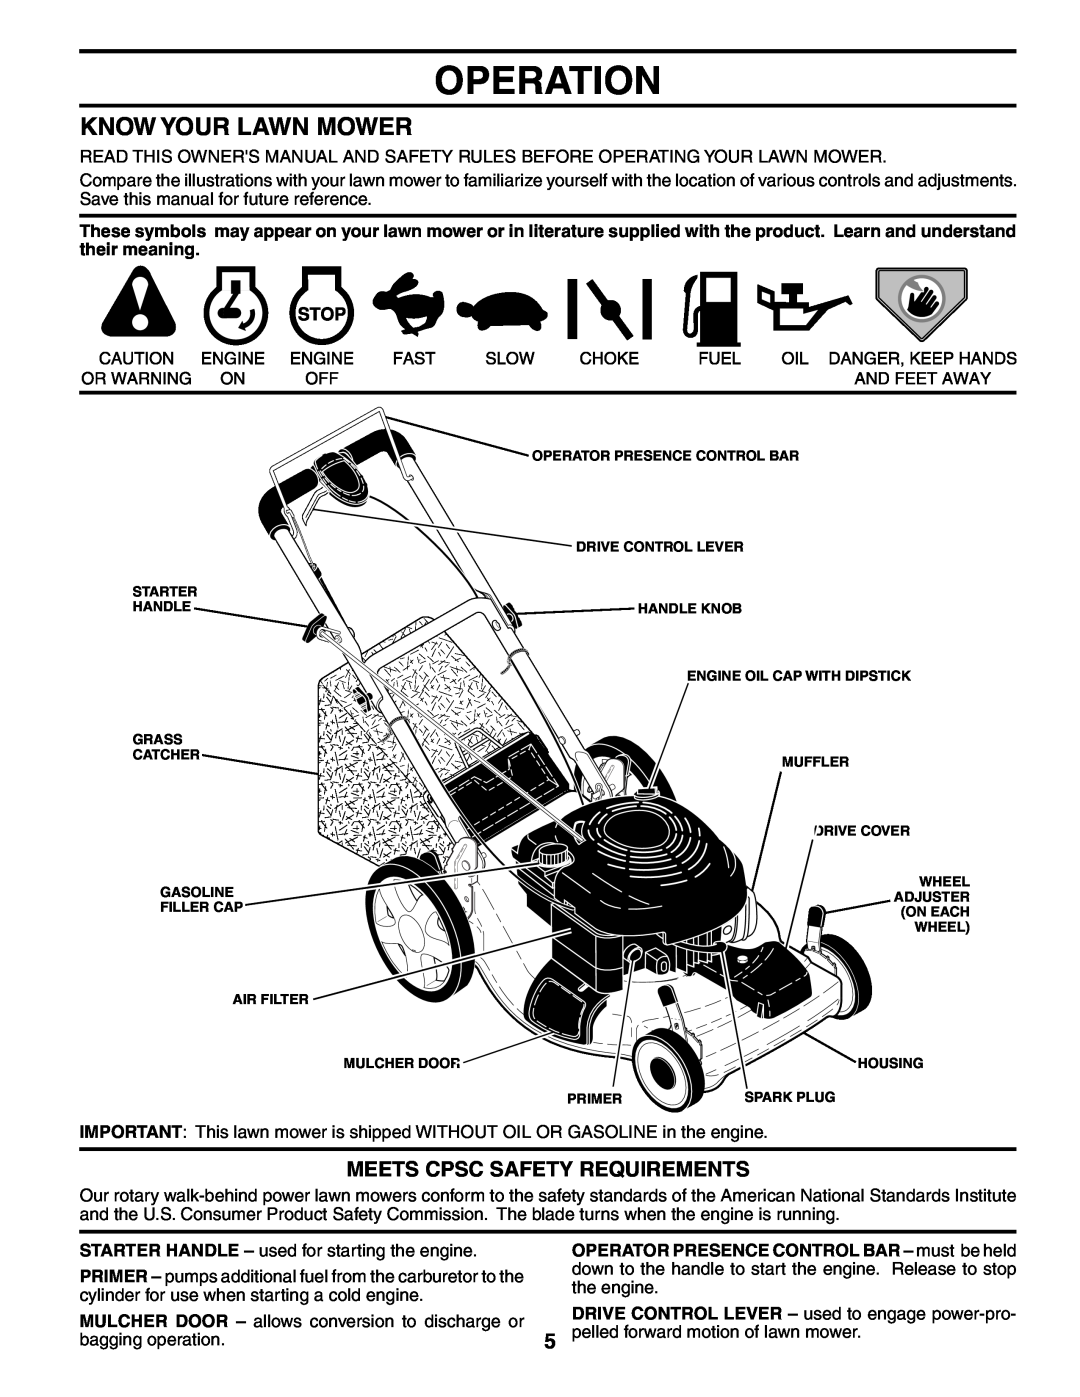 Husqvarna 917.375361 owner manual Operation, Know Your Lawn Mower, Meets Cpsc Safety Requirements 